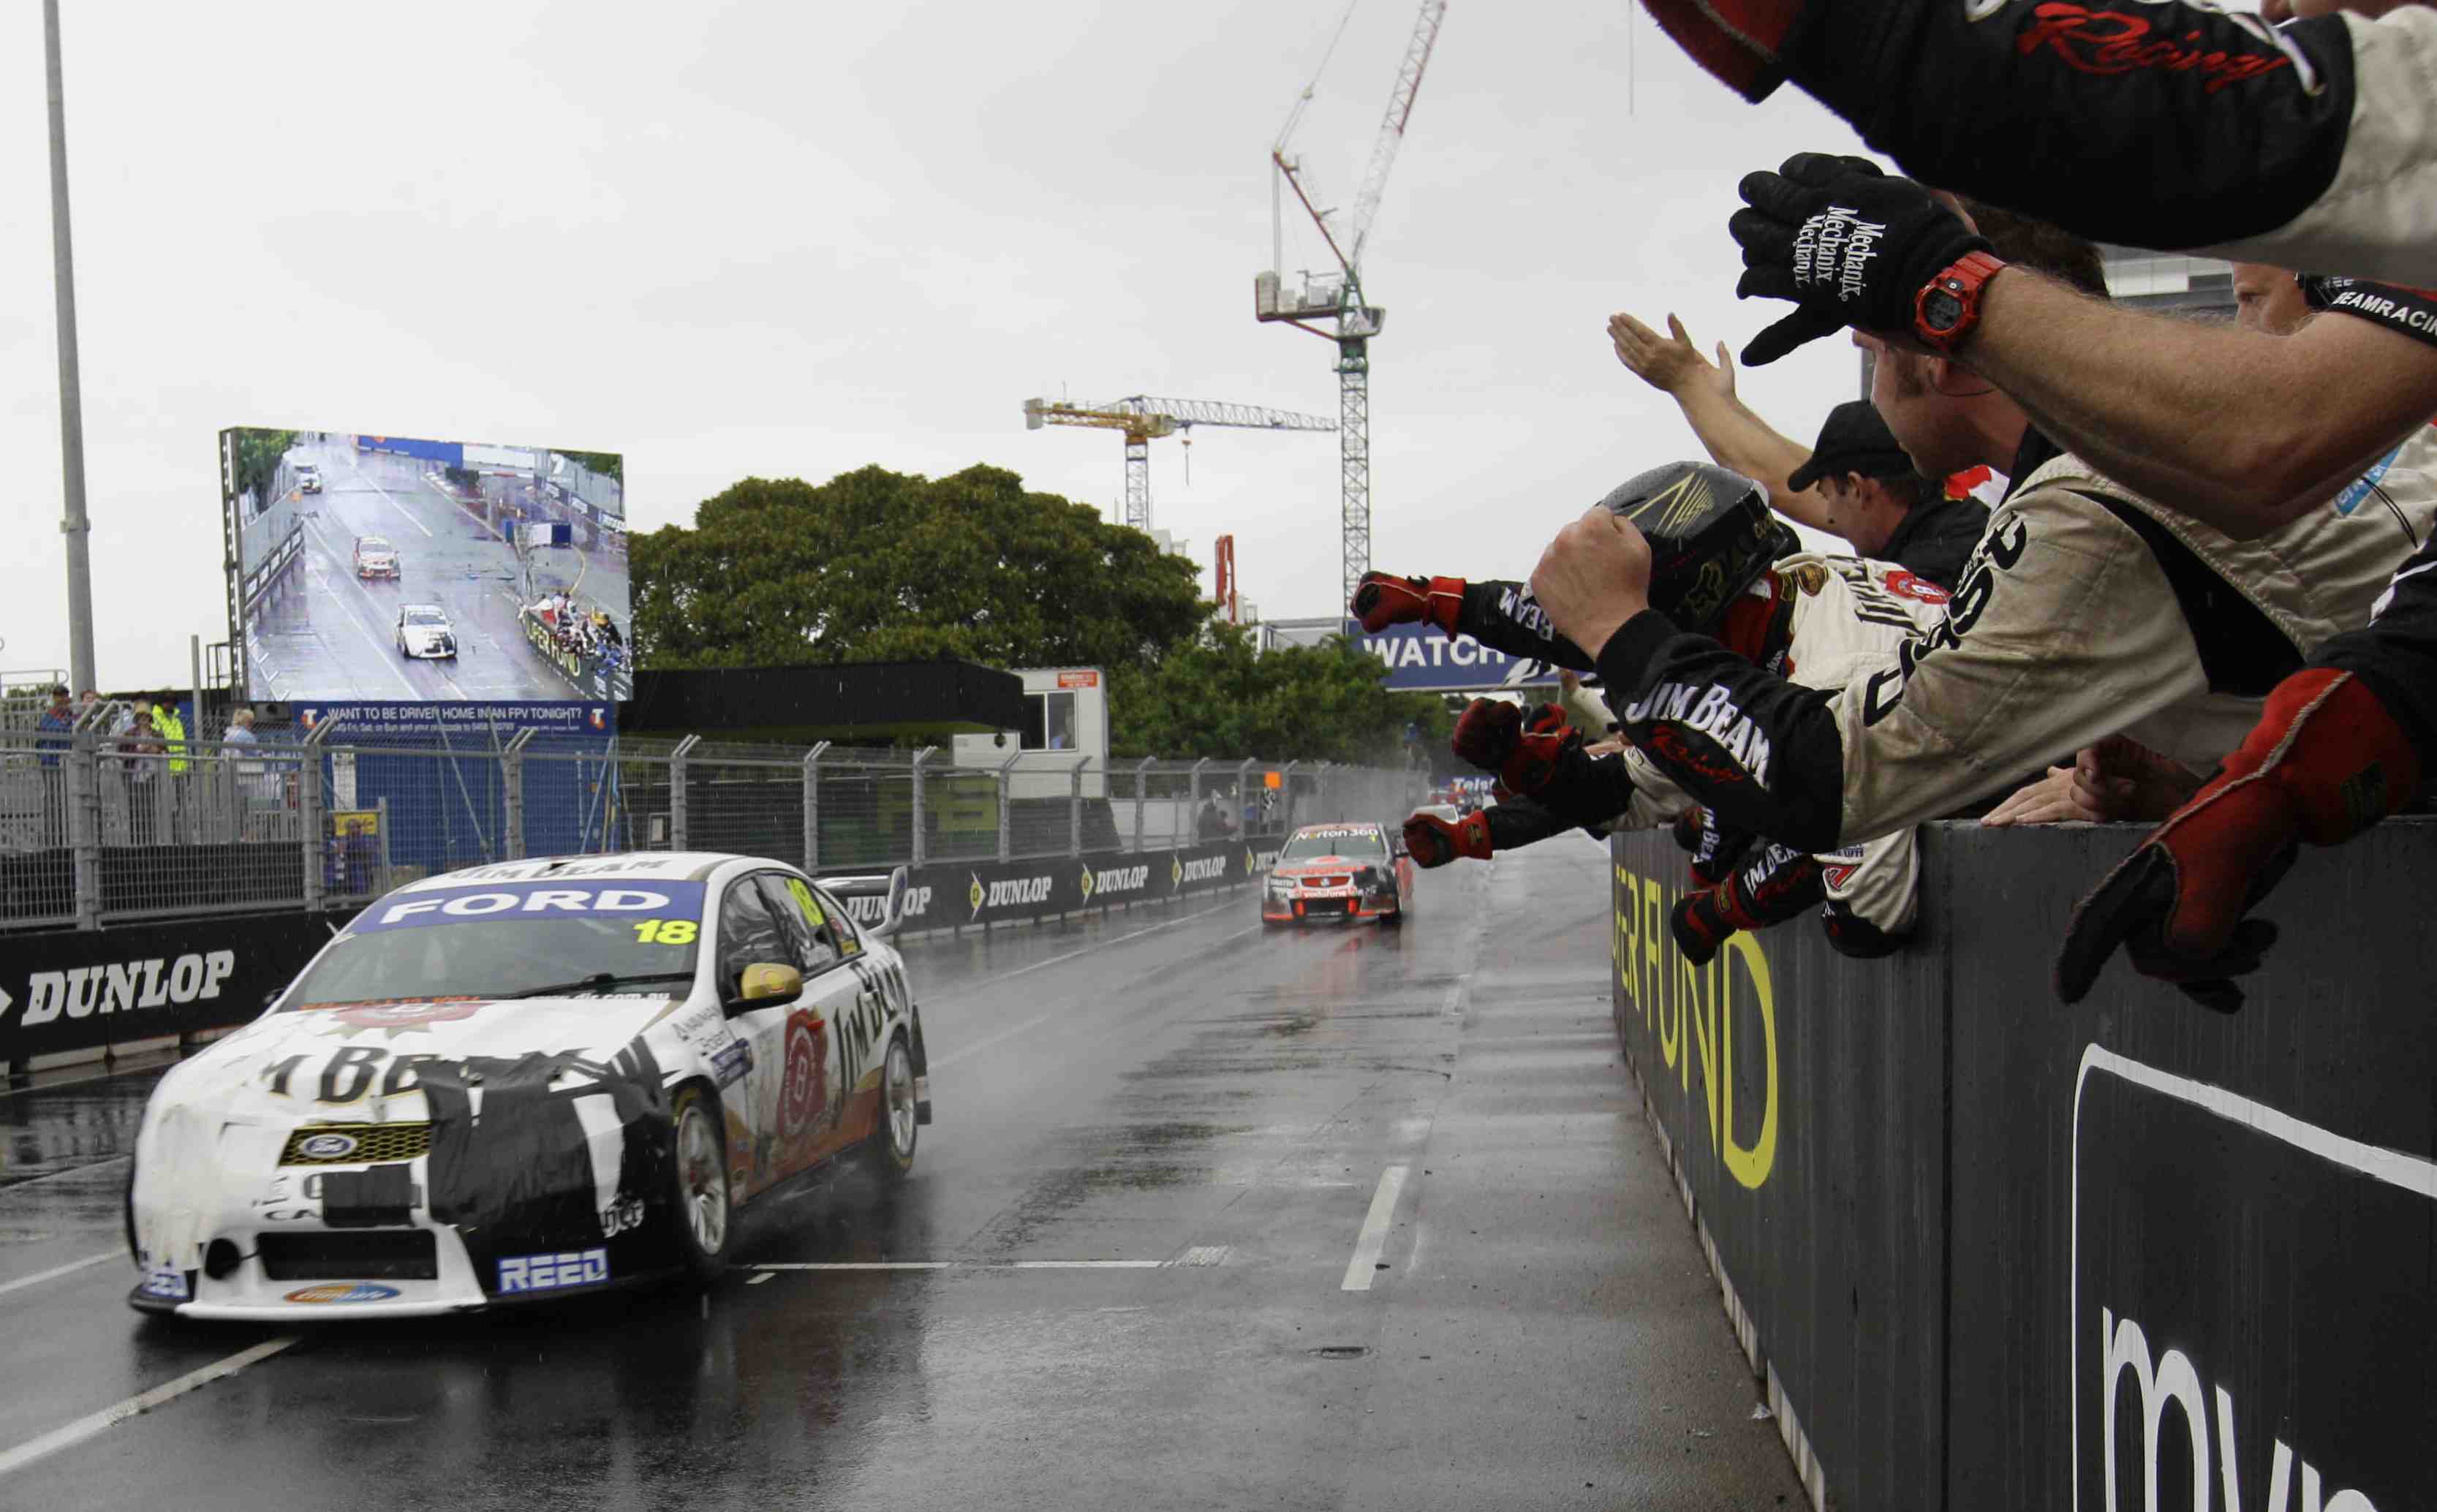 CRASH OF THE DAY: Wet weather chaos at the Sydney 500